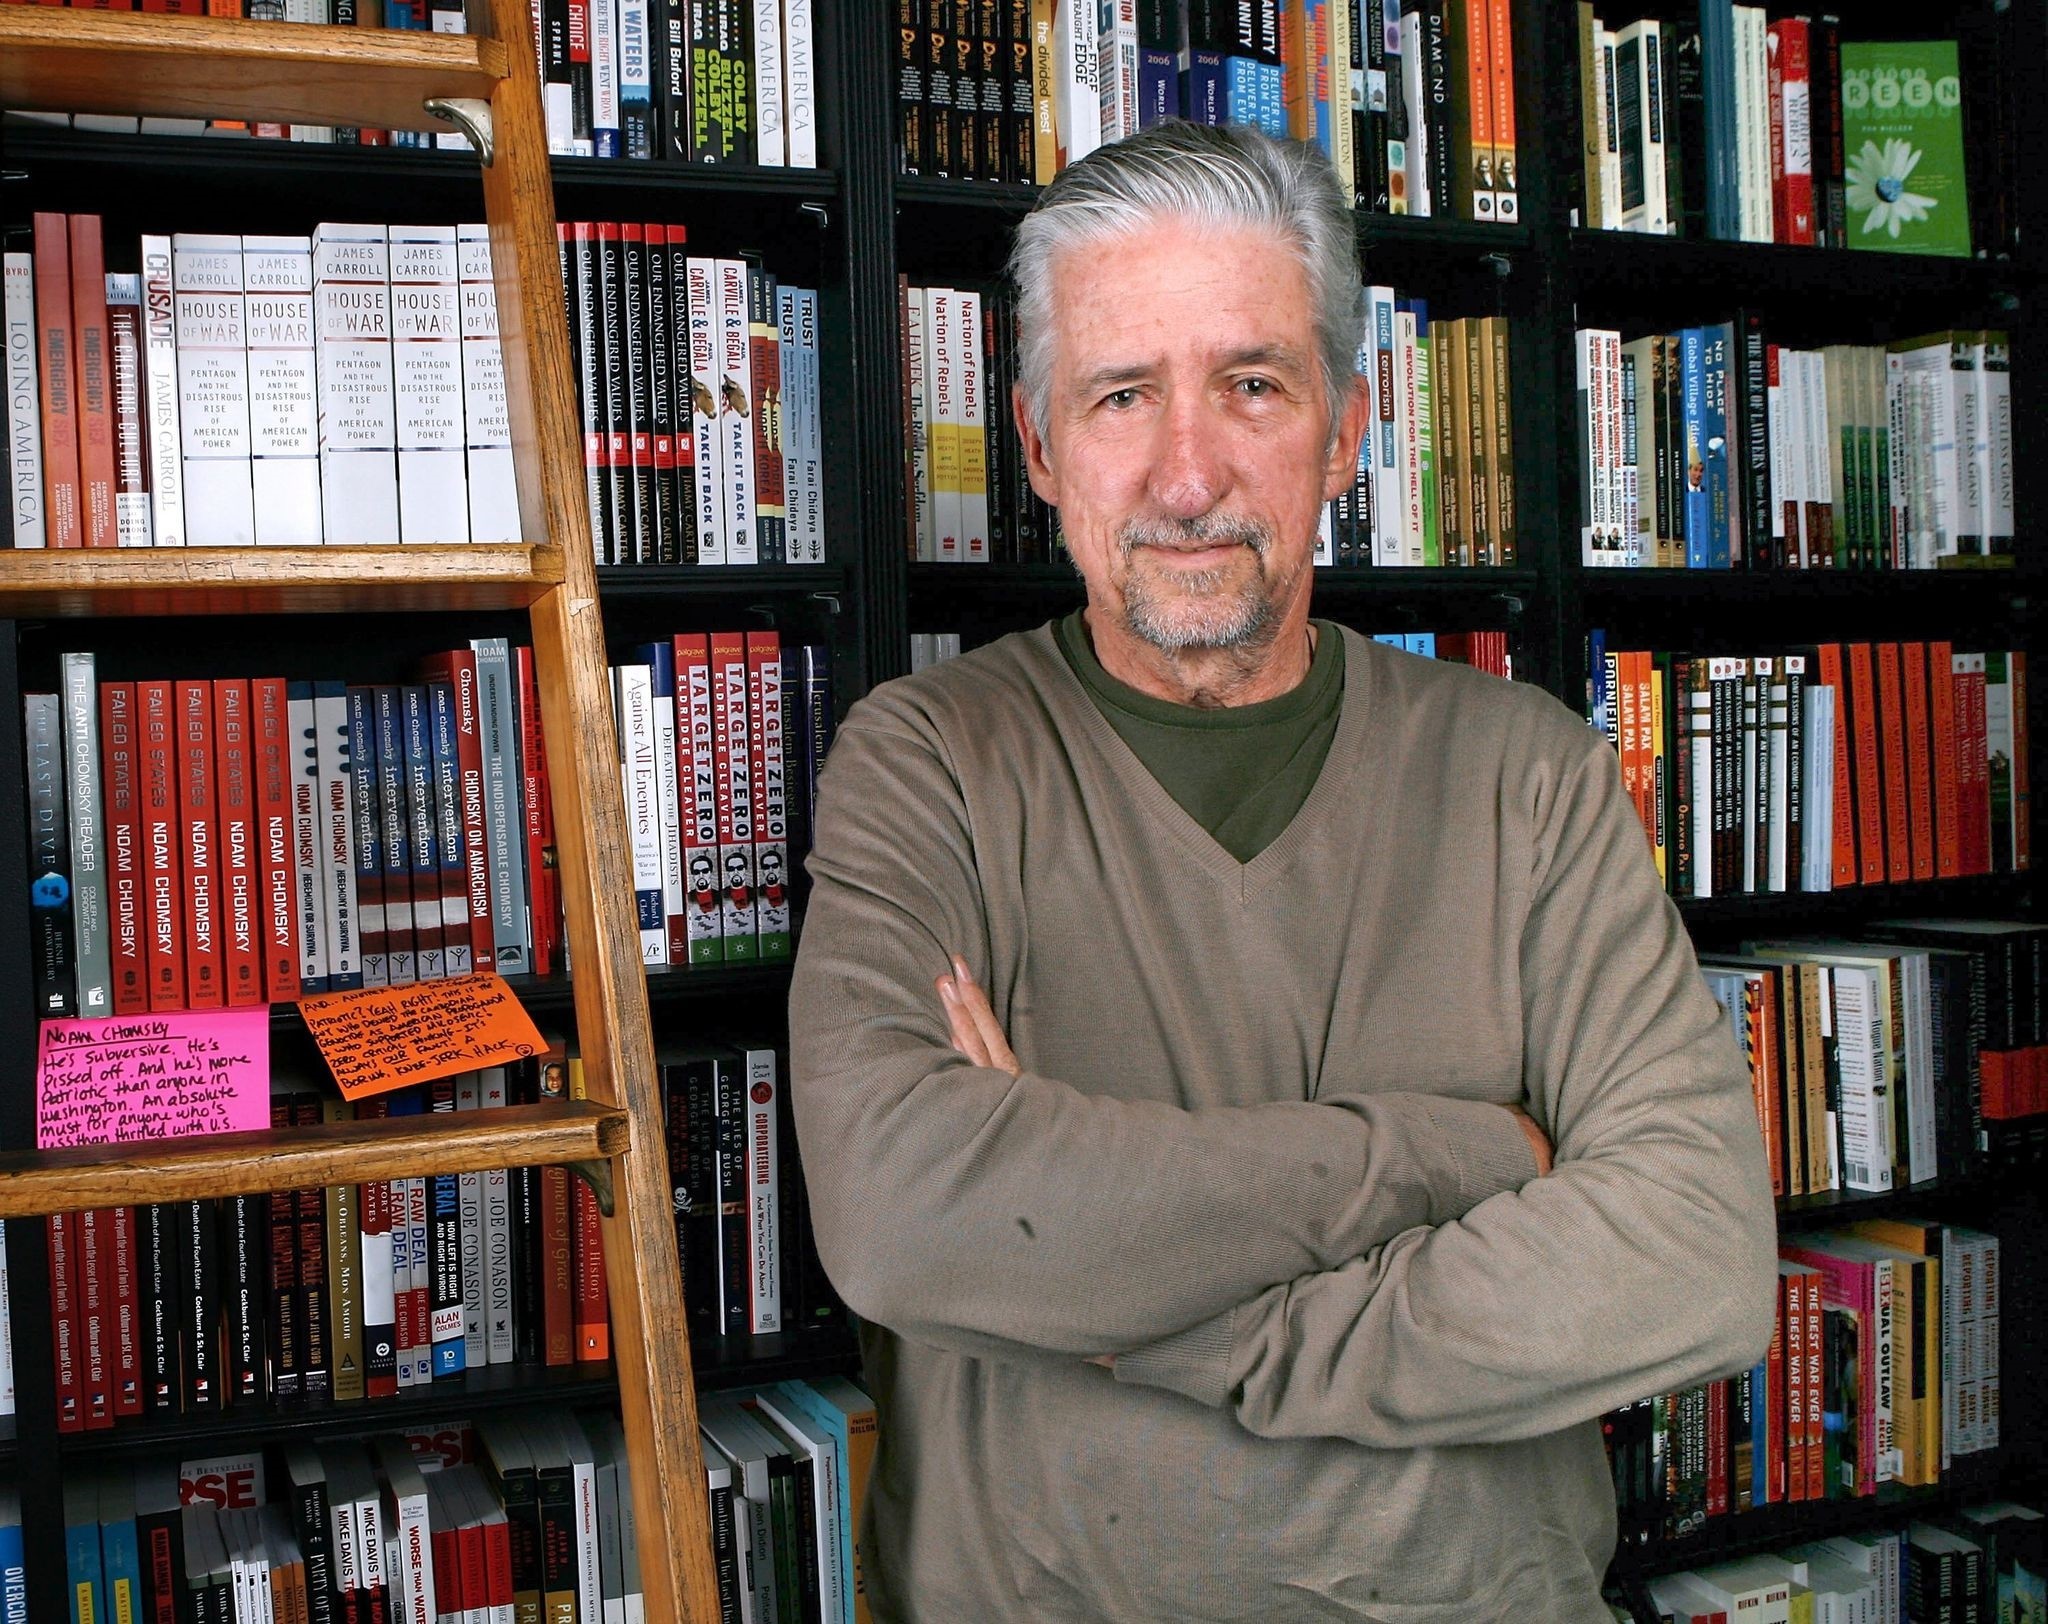 This file photo taken on June 25, 2007 shows former US senator and author Tom Hayden posing before signing copies of his book, ,Ending The War in Iraq, at Book Soup in Los Angeles, California. (AFP Photo)